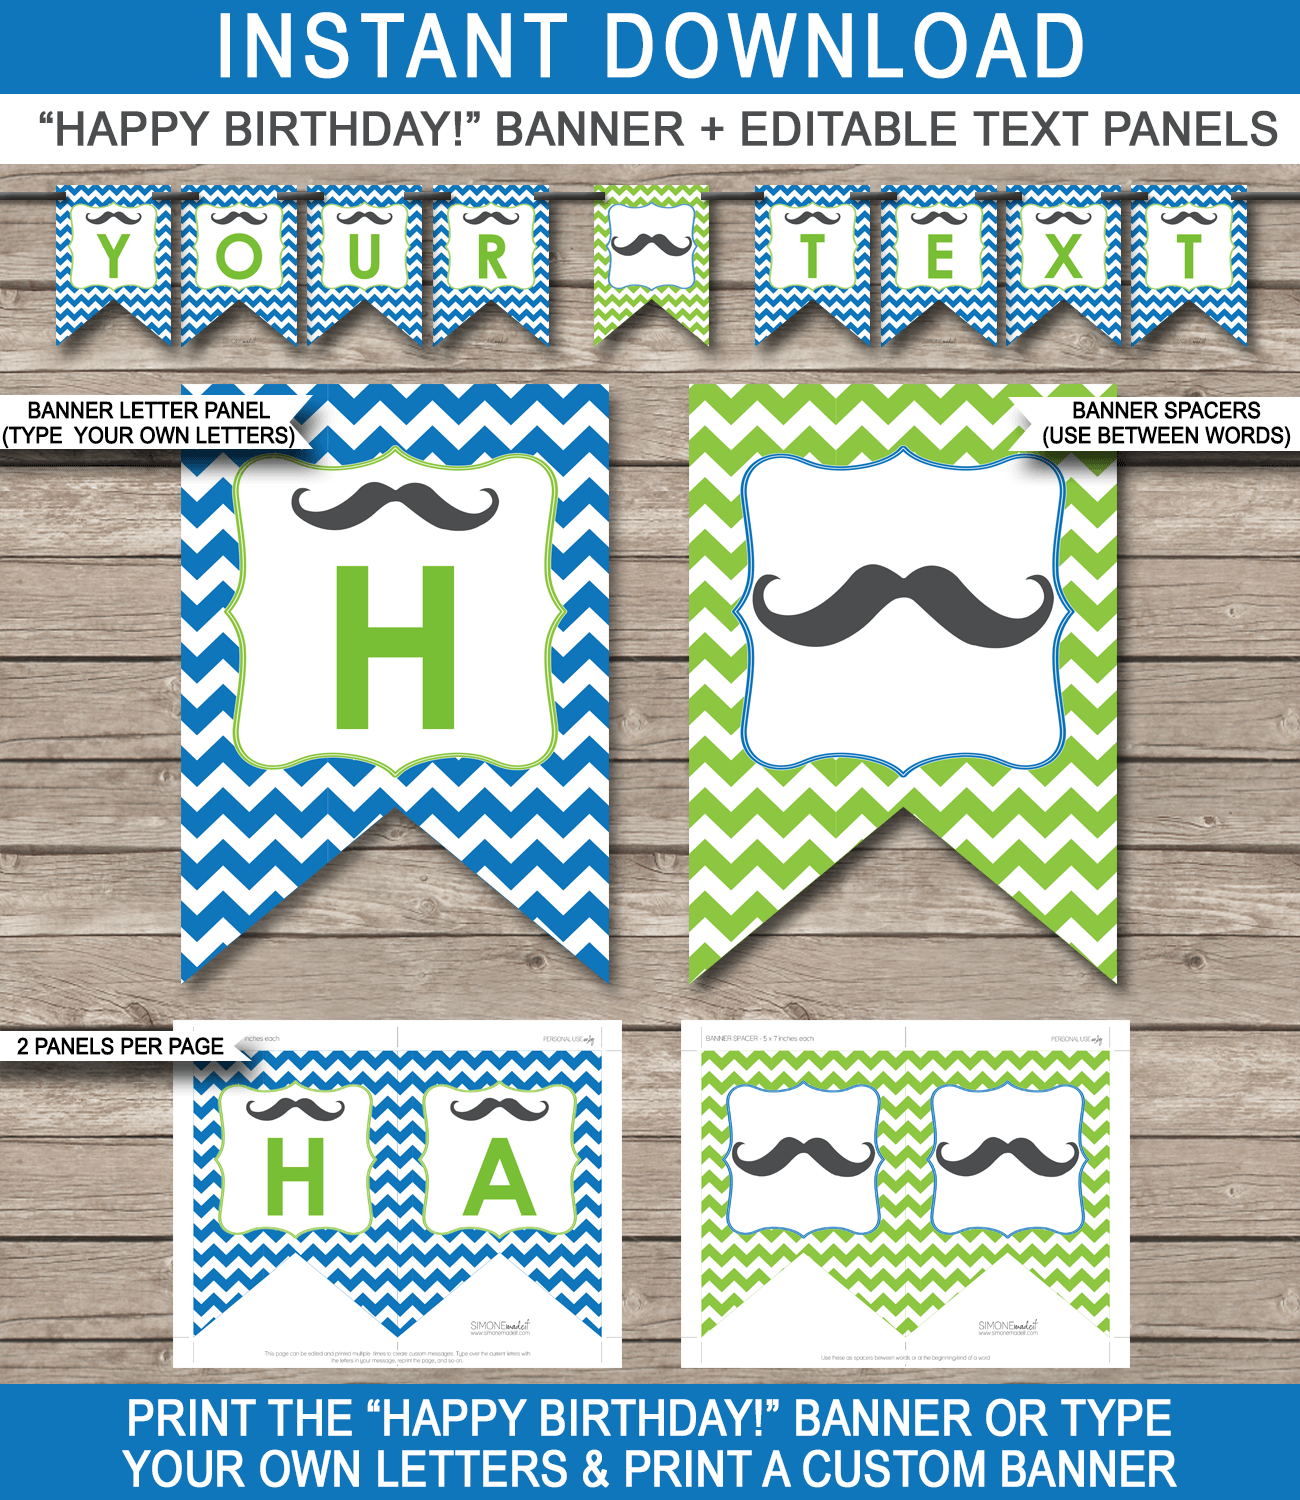 Stache Your Presents Here Sign DIY Digital File 8x10 Colorful Sign #M142 Printable Mustache Birthday Party Decorations